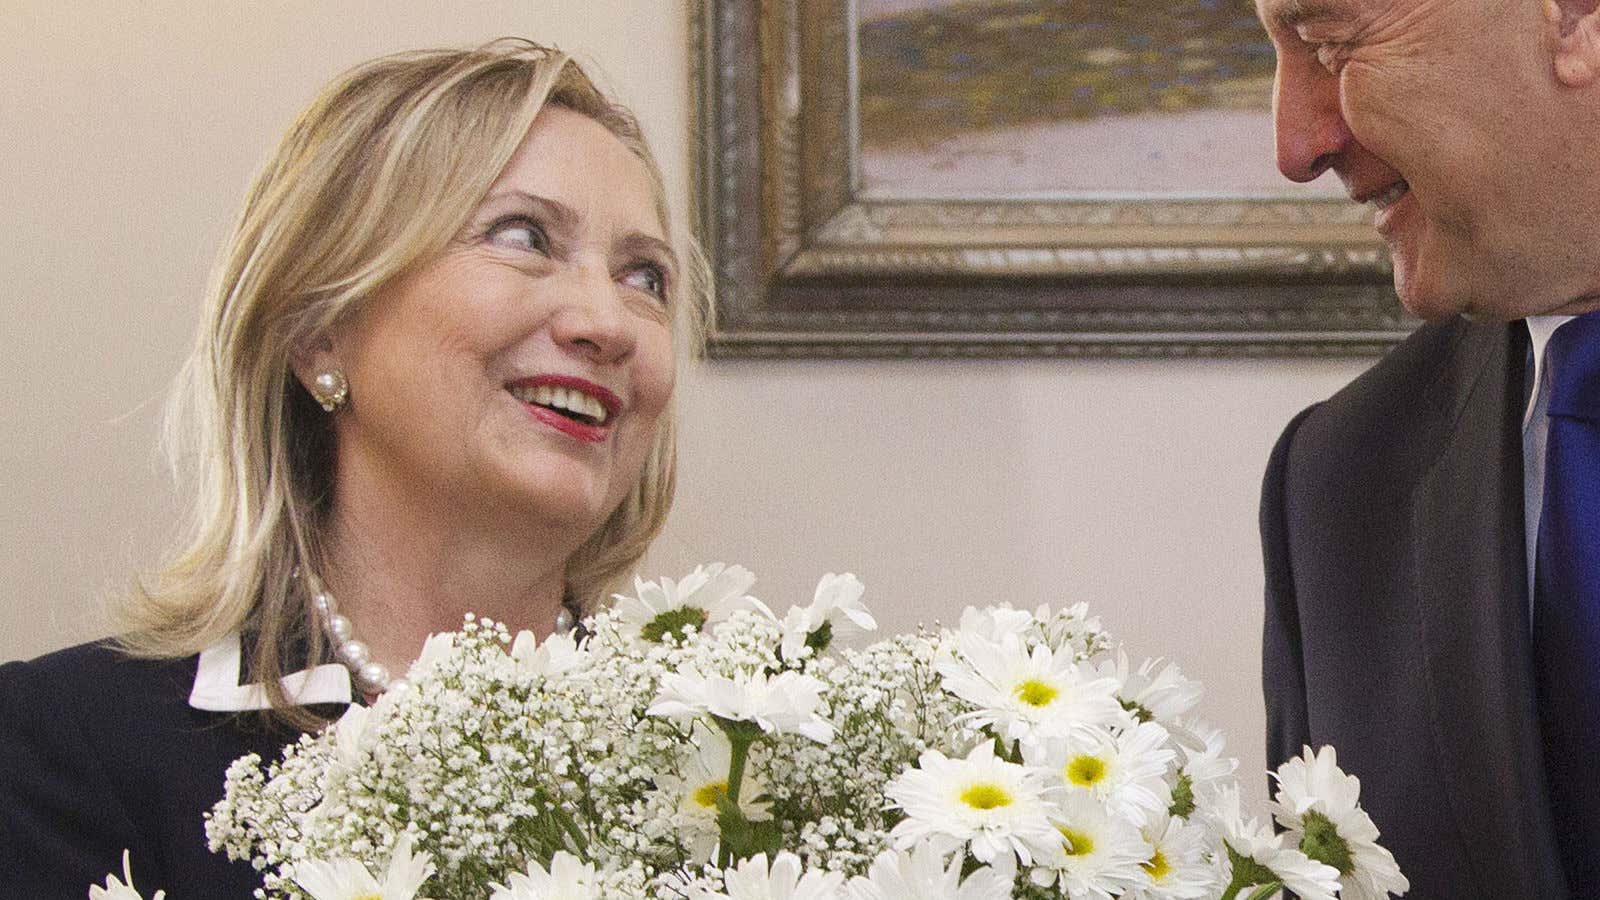 Hillary Clinton receives yet another gift of flowers.